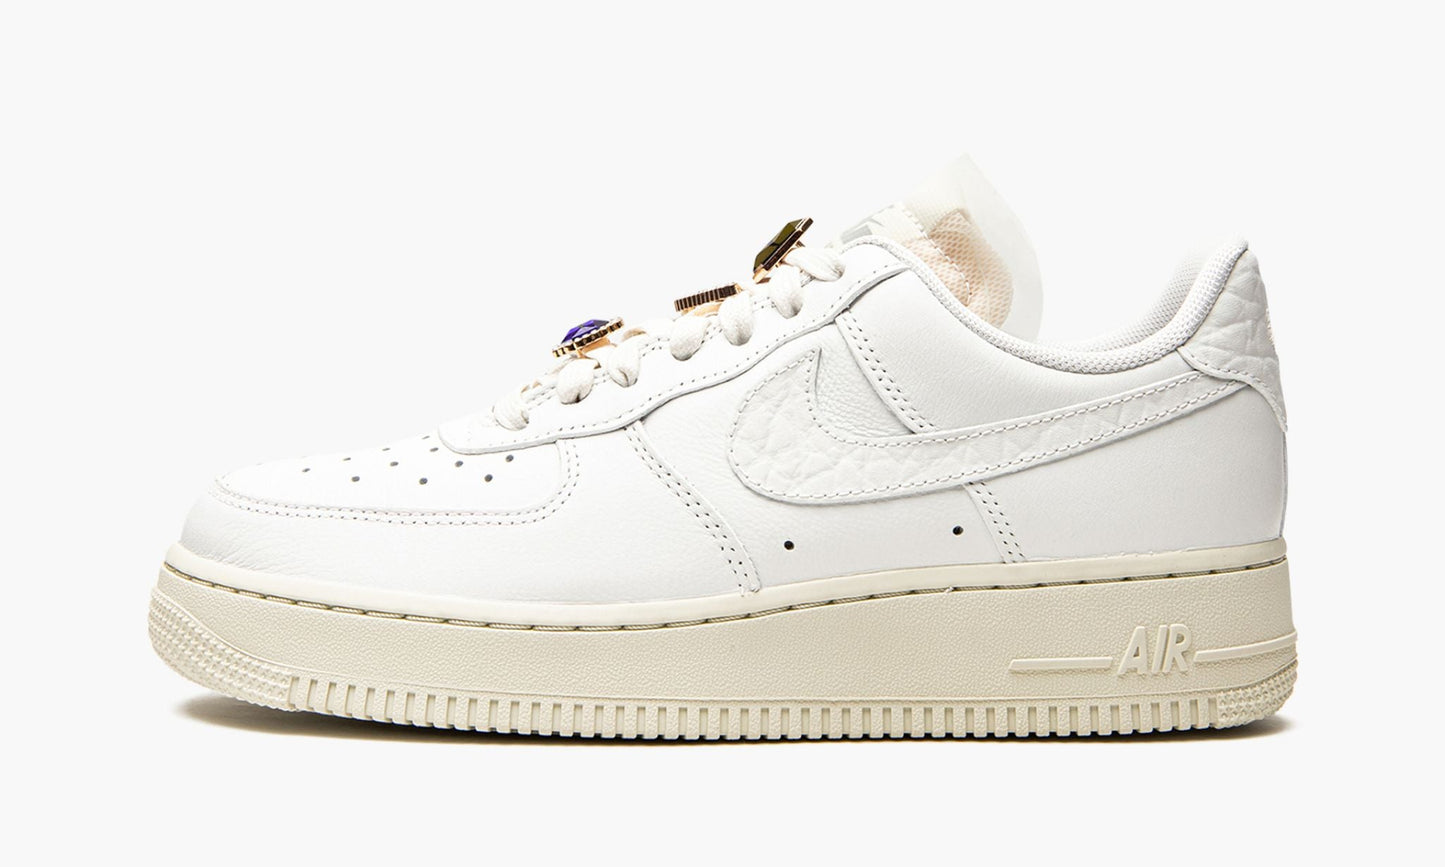 WMNS Nike Air Force 1 Low PRM "Jewels White"